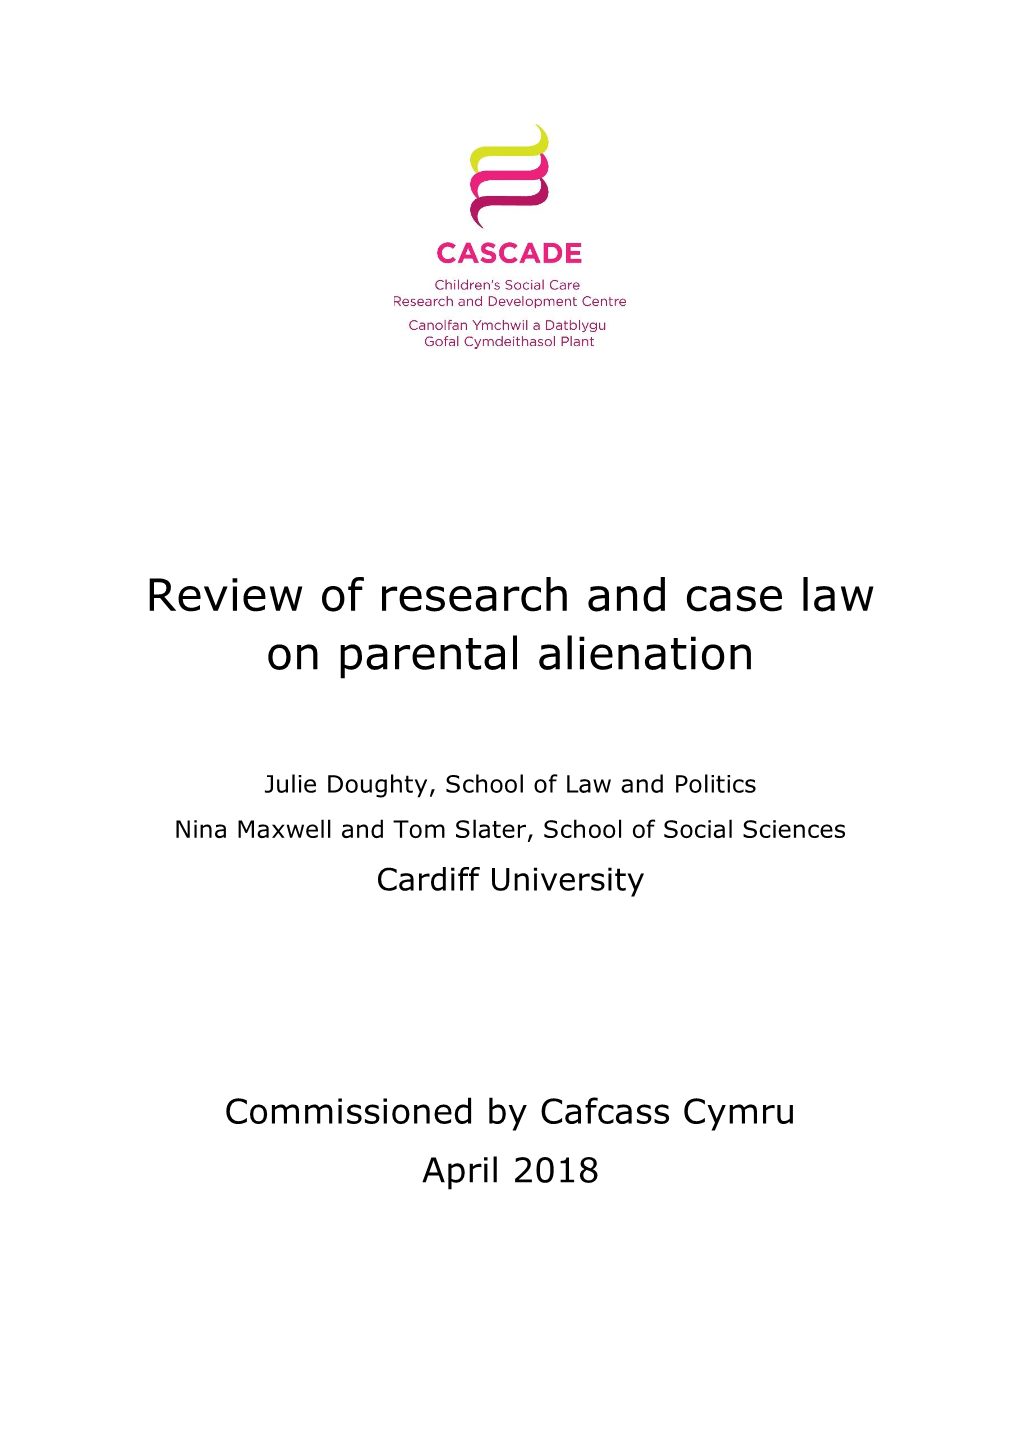 Review of Research and Case Law on Parental Alienation , File Type